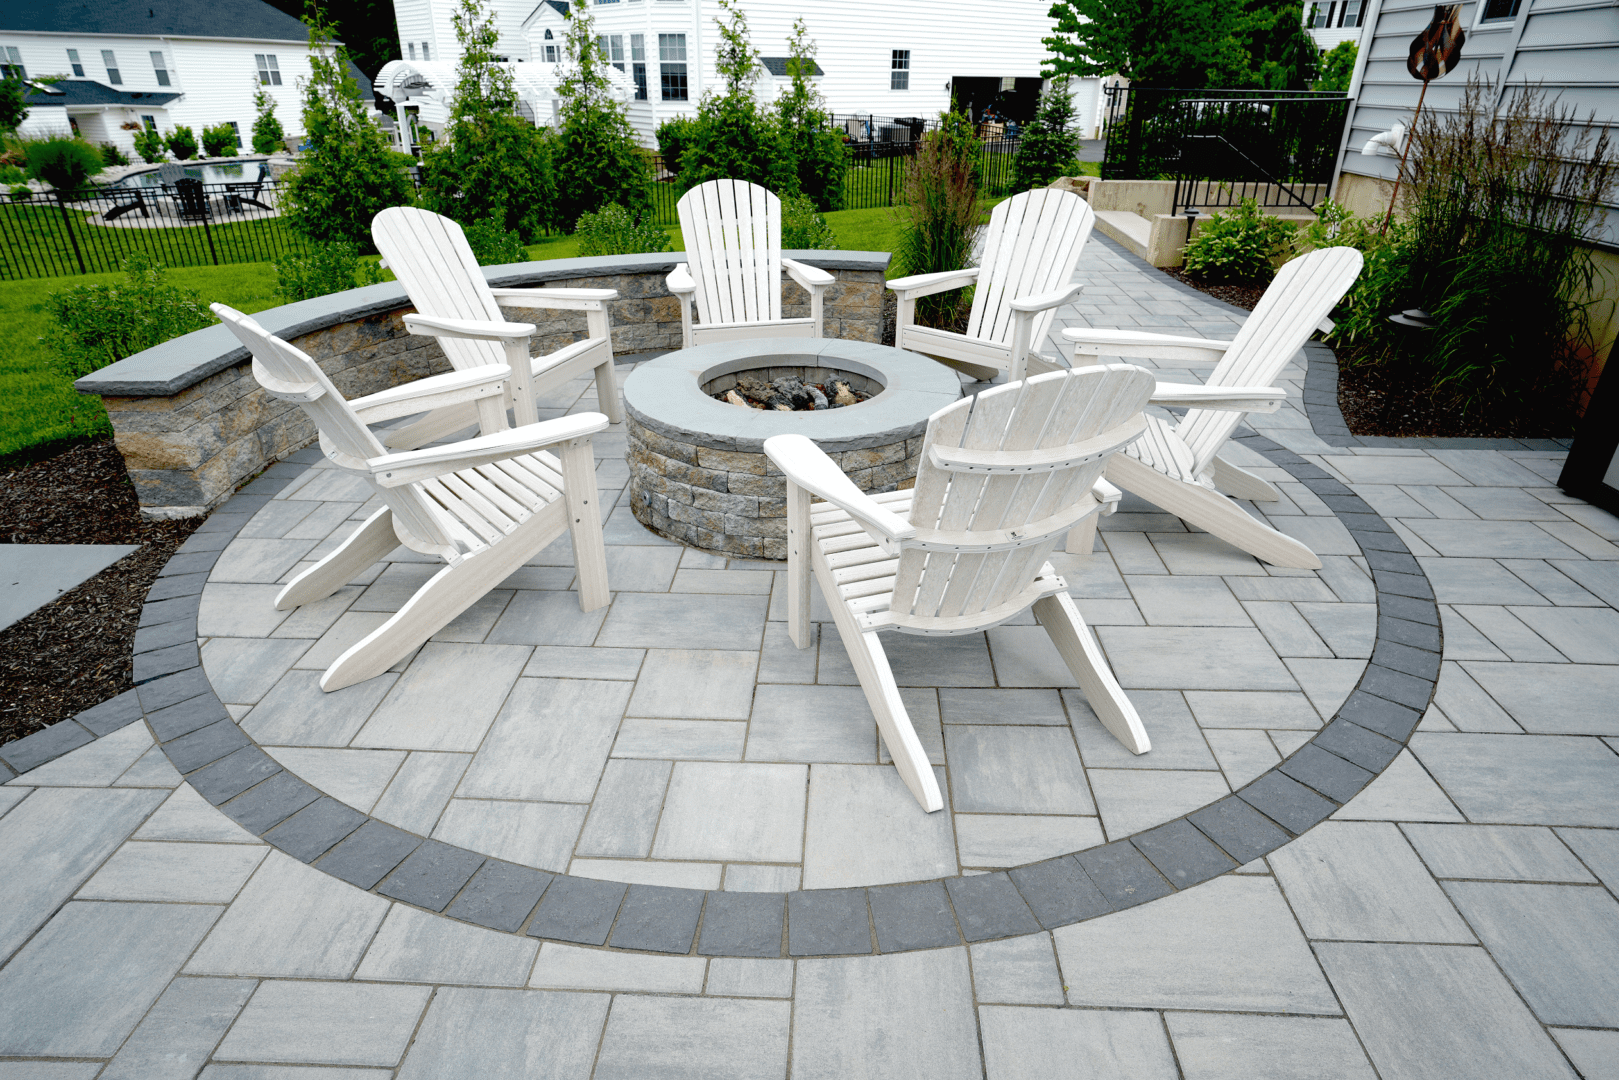 A patio with white chairs and a fire pit, perfect for outdoor gatherings and relaxation.